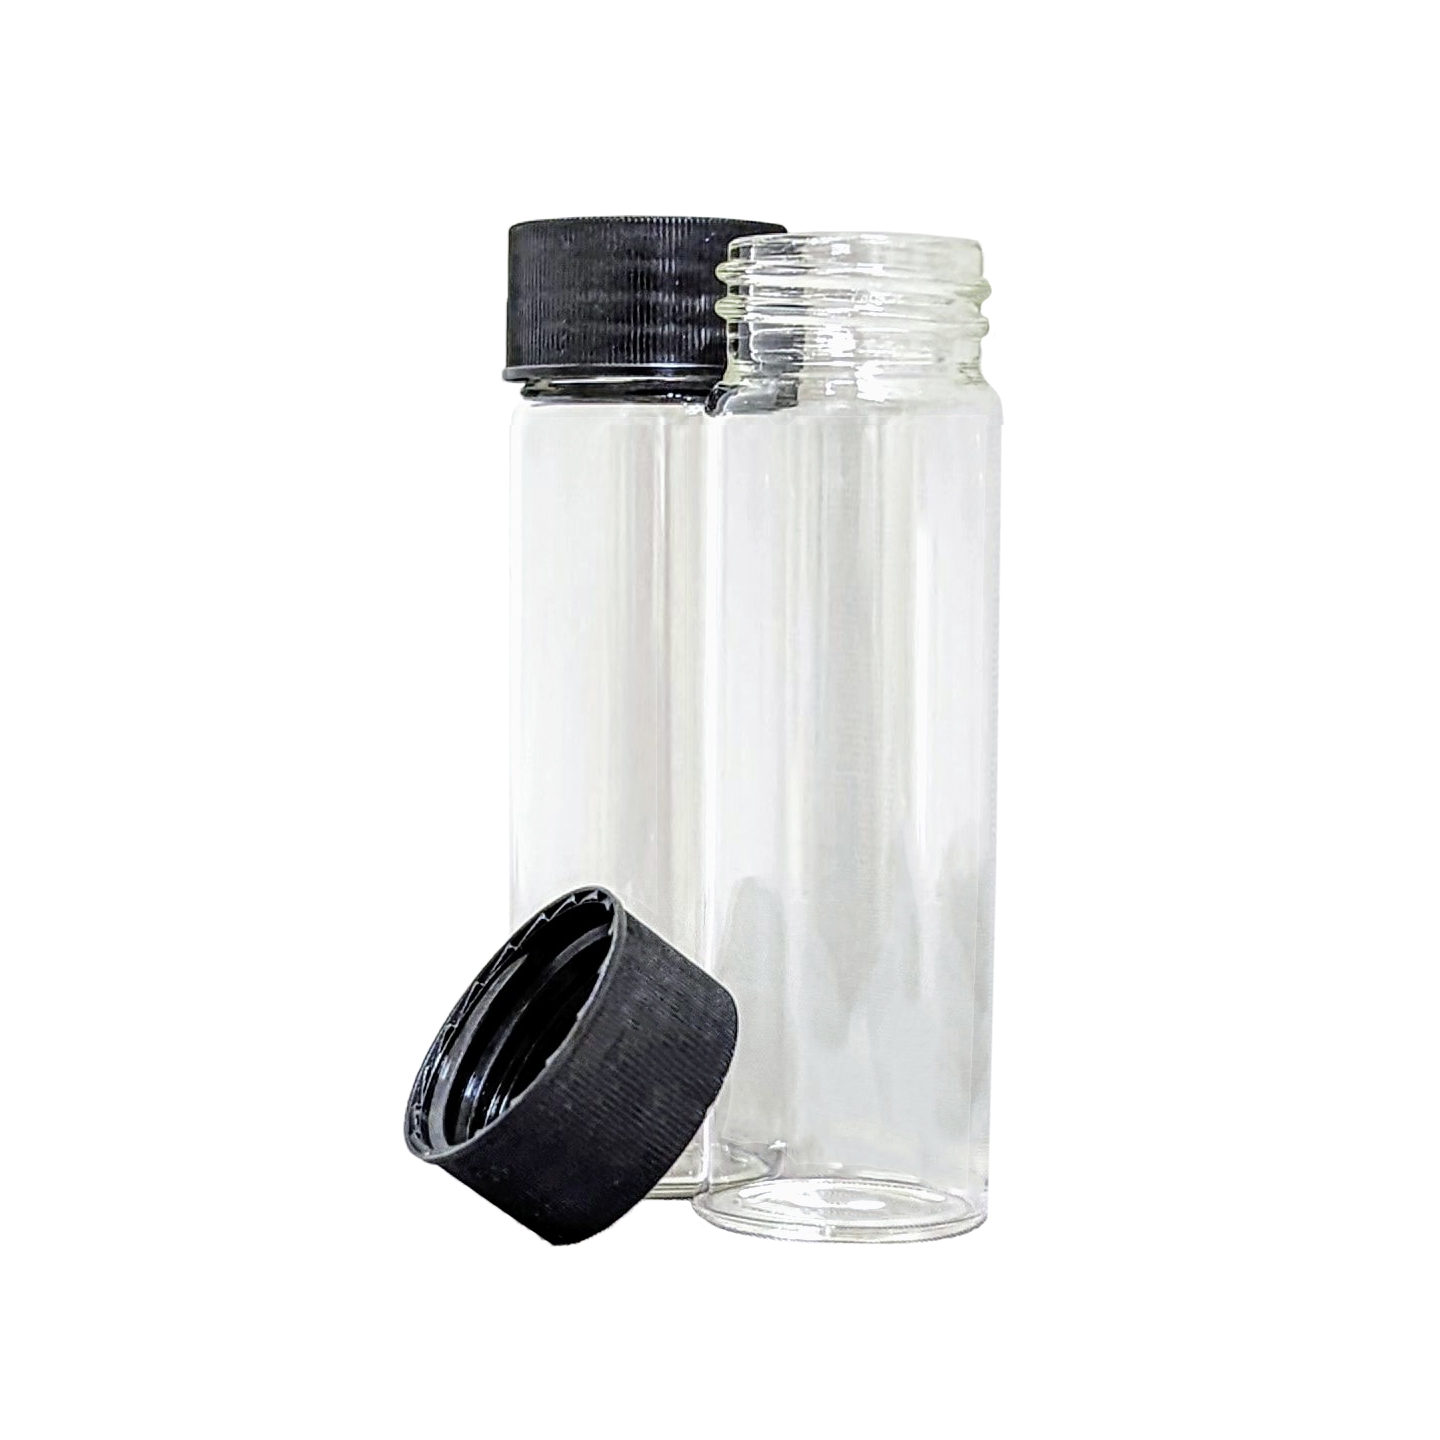 Vial, Screw Neck Vials, Tall Form, Capacity 14ml, With Unattached Polypropylene Closure